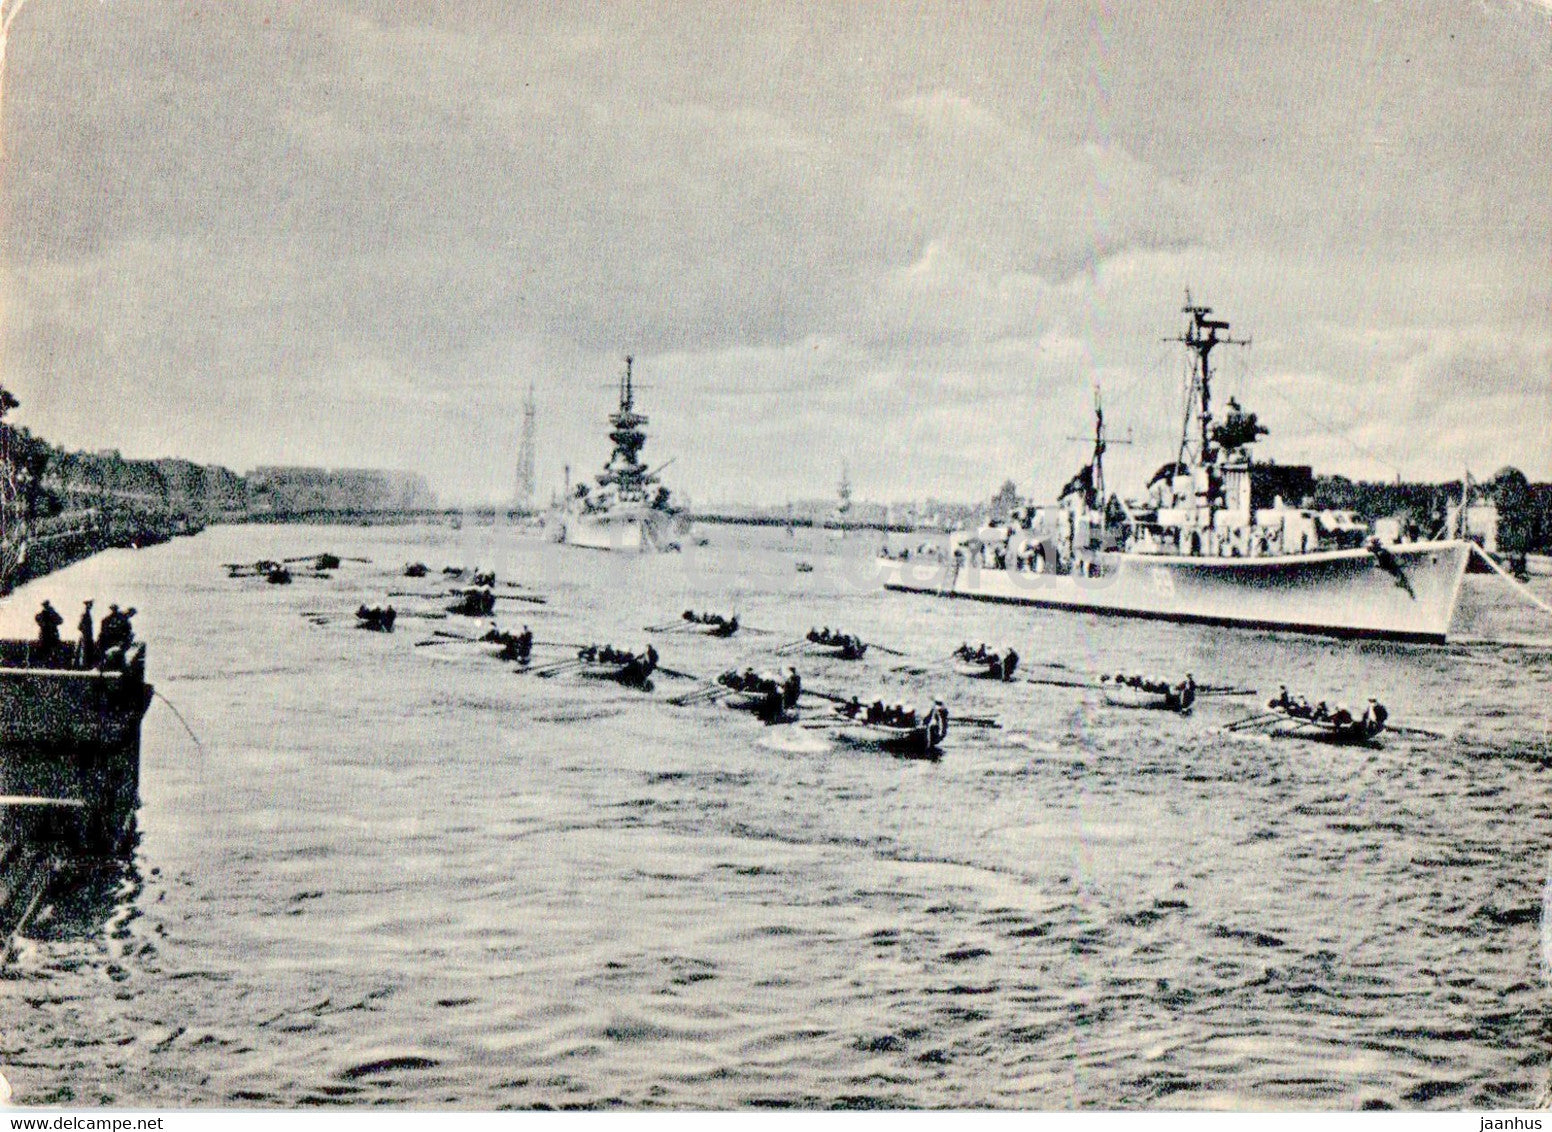 Leningrad - St Petersburg - ships on the Neva on the day of the Navy - ship - warship - 1957 - Russia USSR - unused - JH Postcards